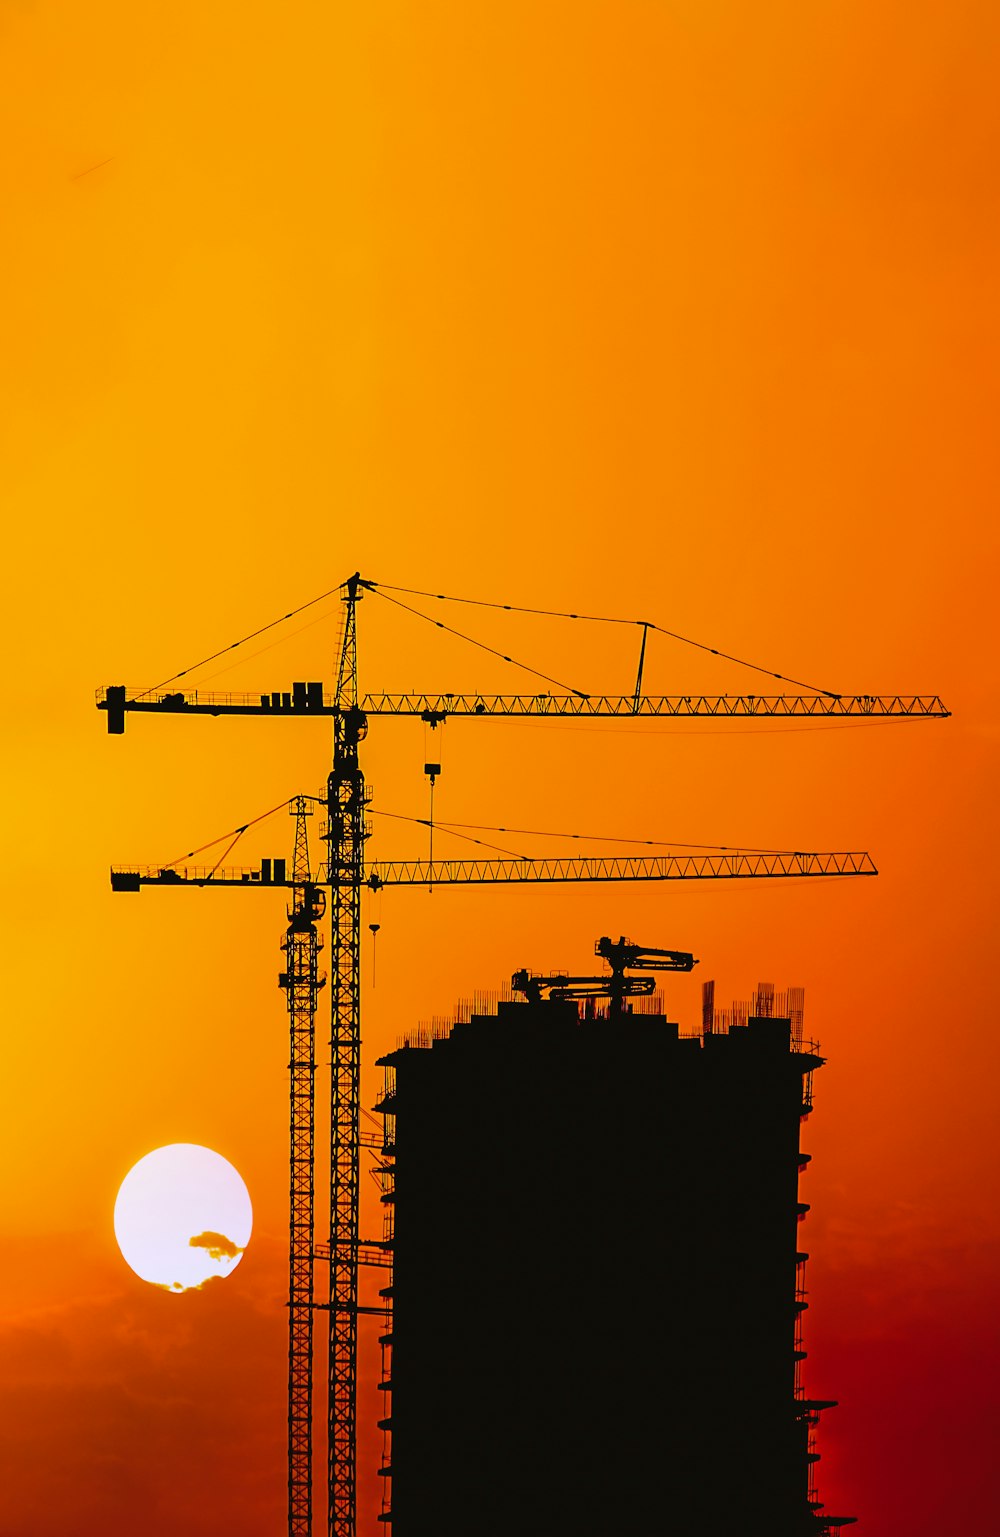 the sun is setting behind a building under construction